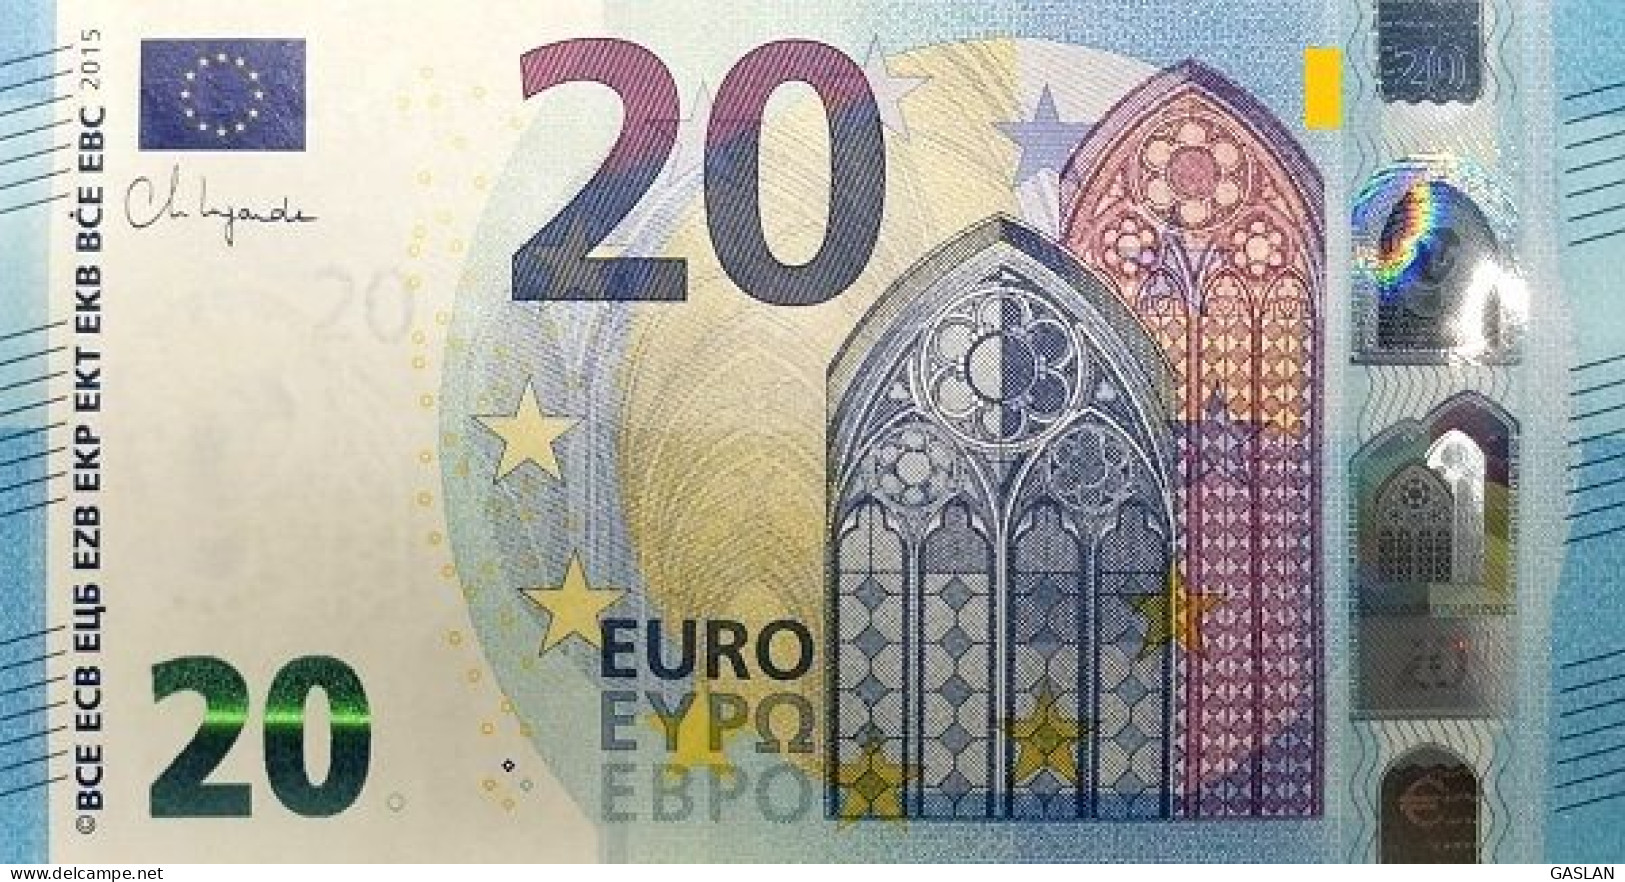 FRANCE 20 FM F001 F002 UNC LAGARDE ONLY ONE CODE - 20 Euro